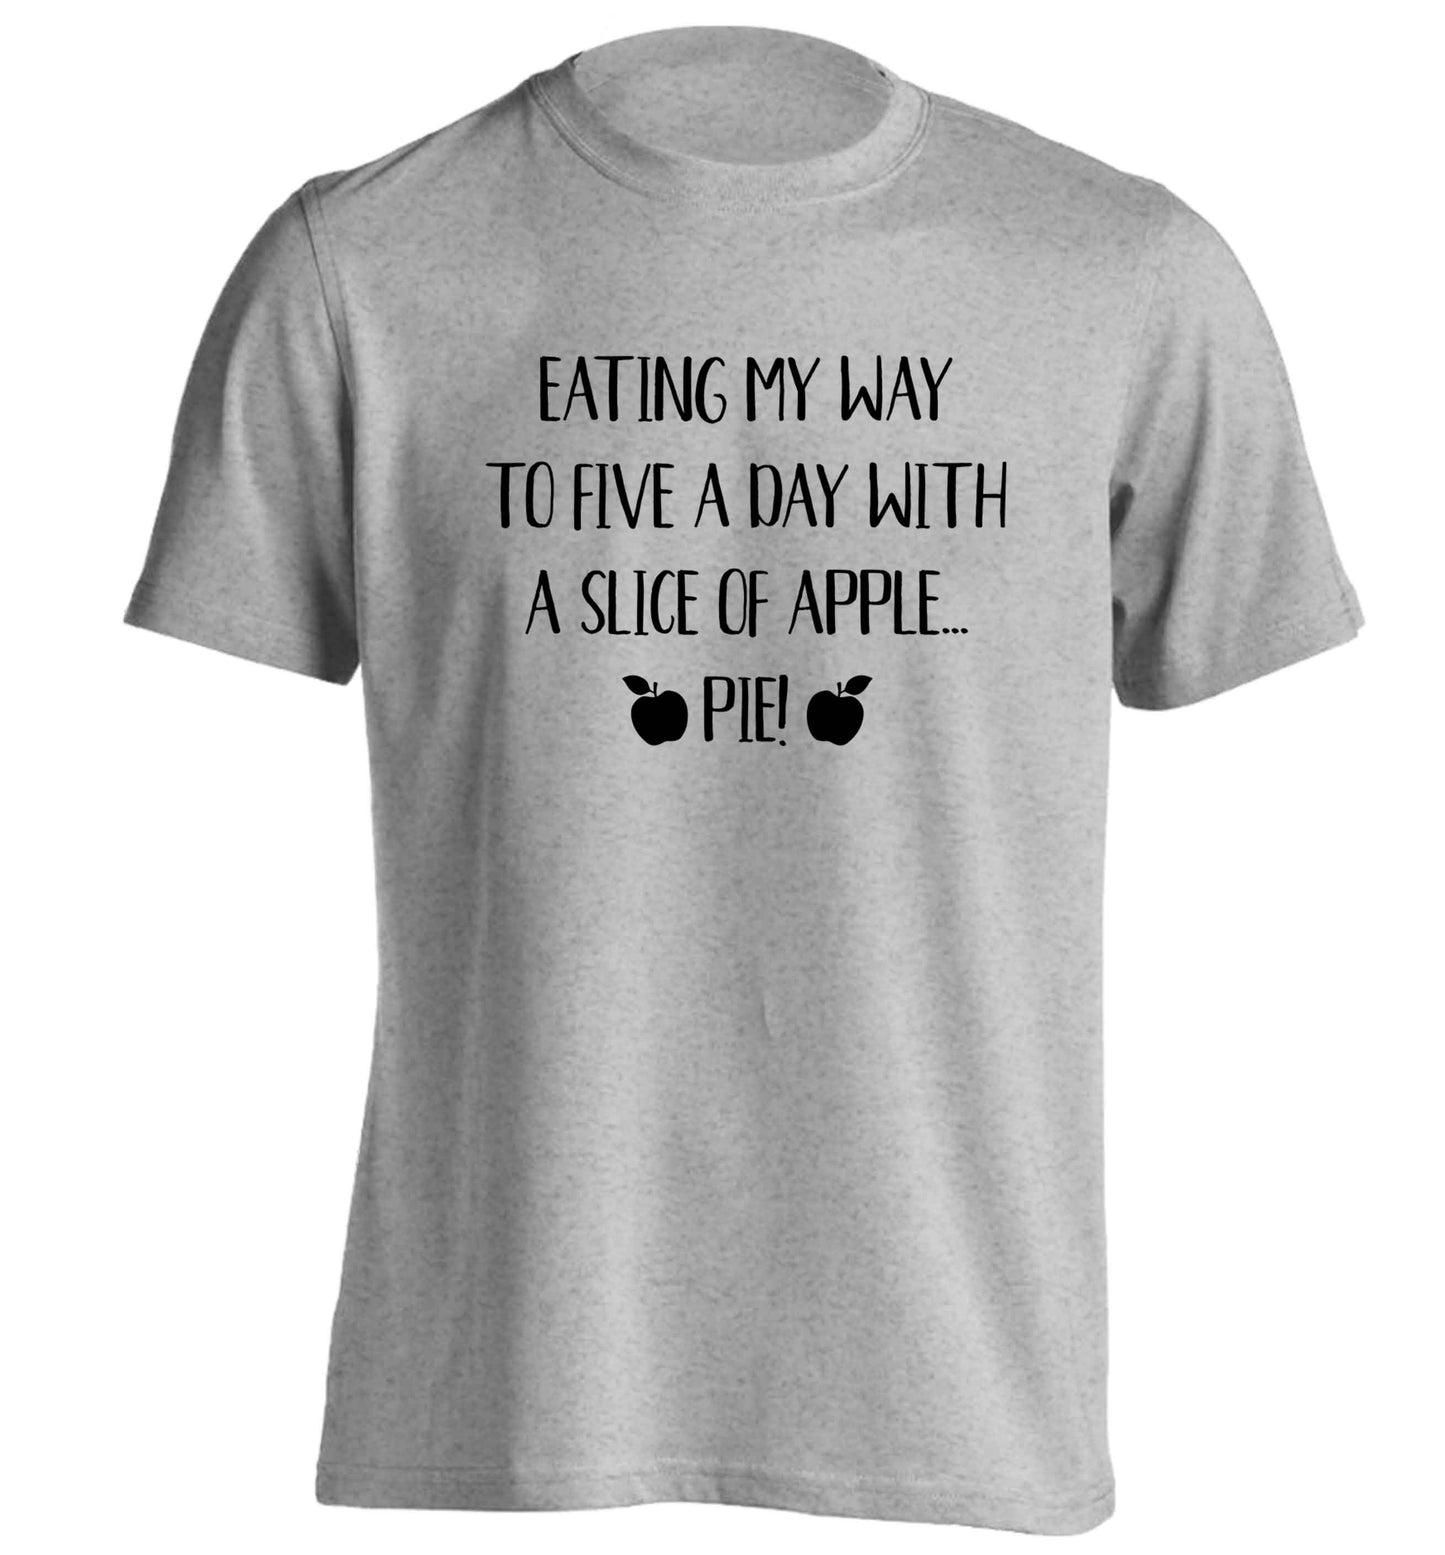 Eating my way to five a day with a slice of apple pie adults unisex grey Tshirt 2XL